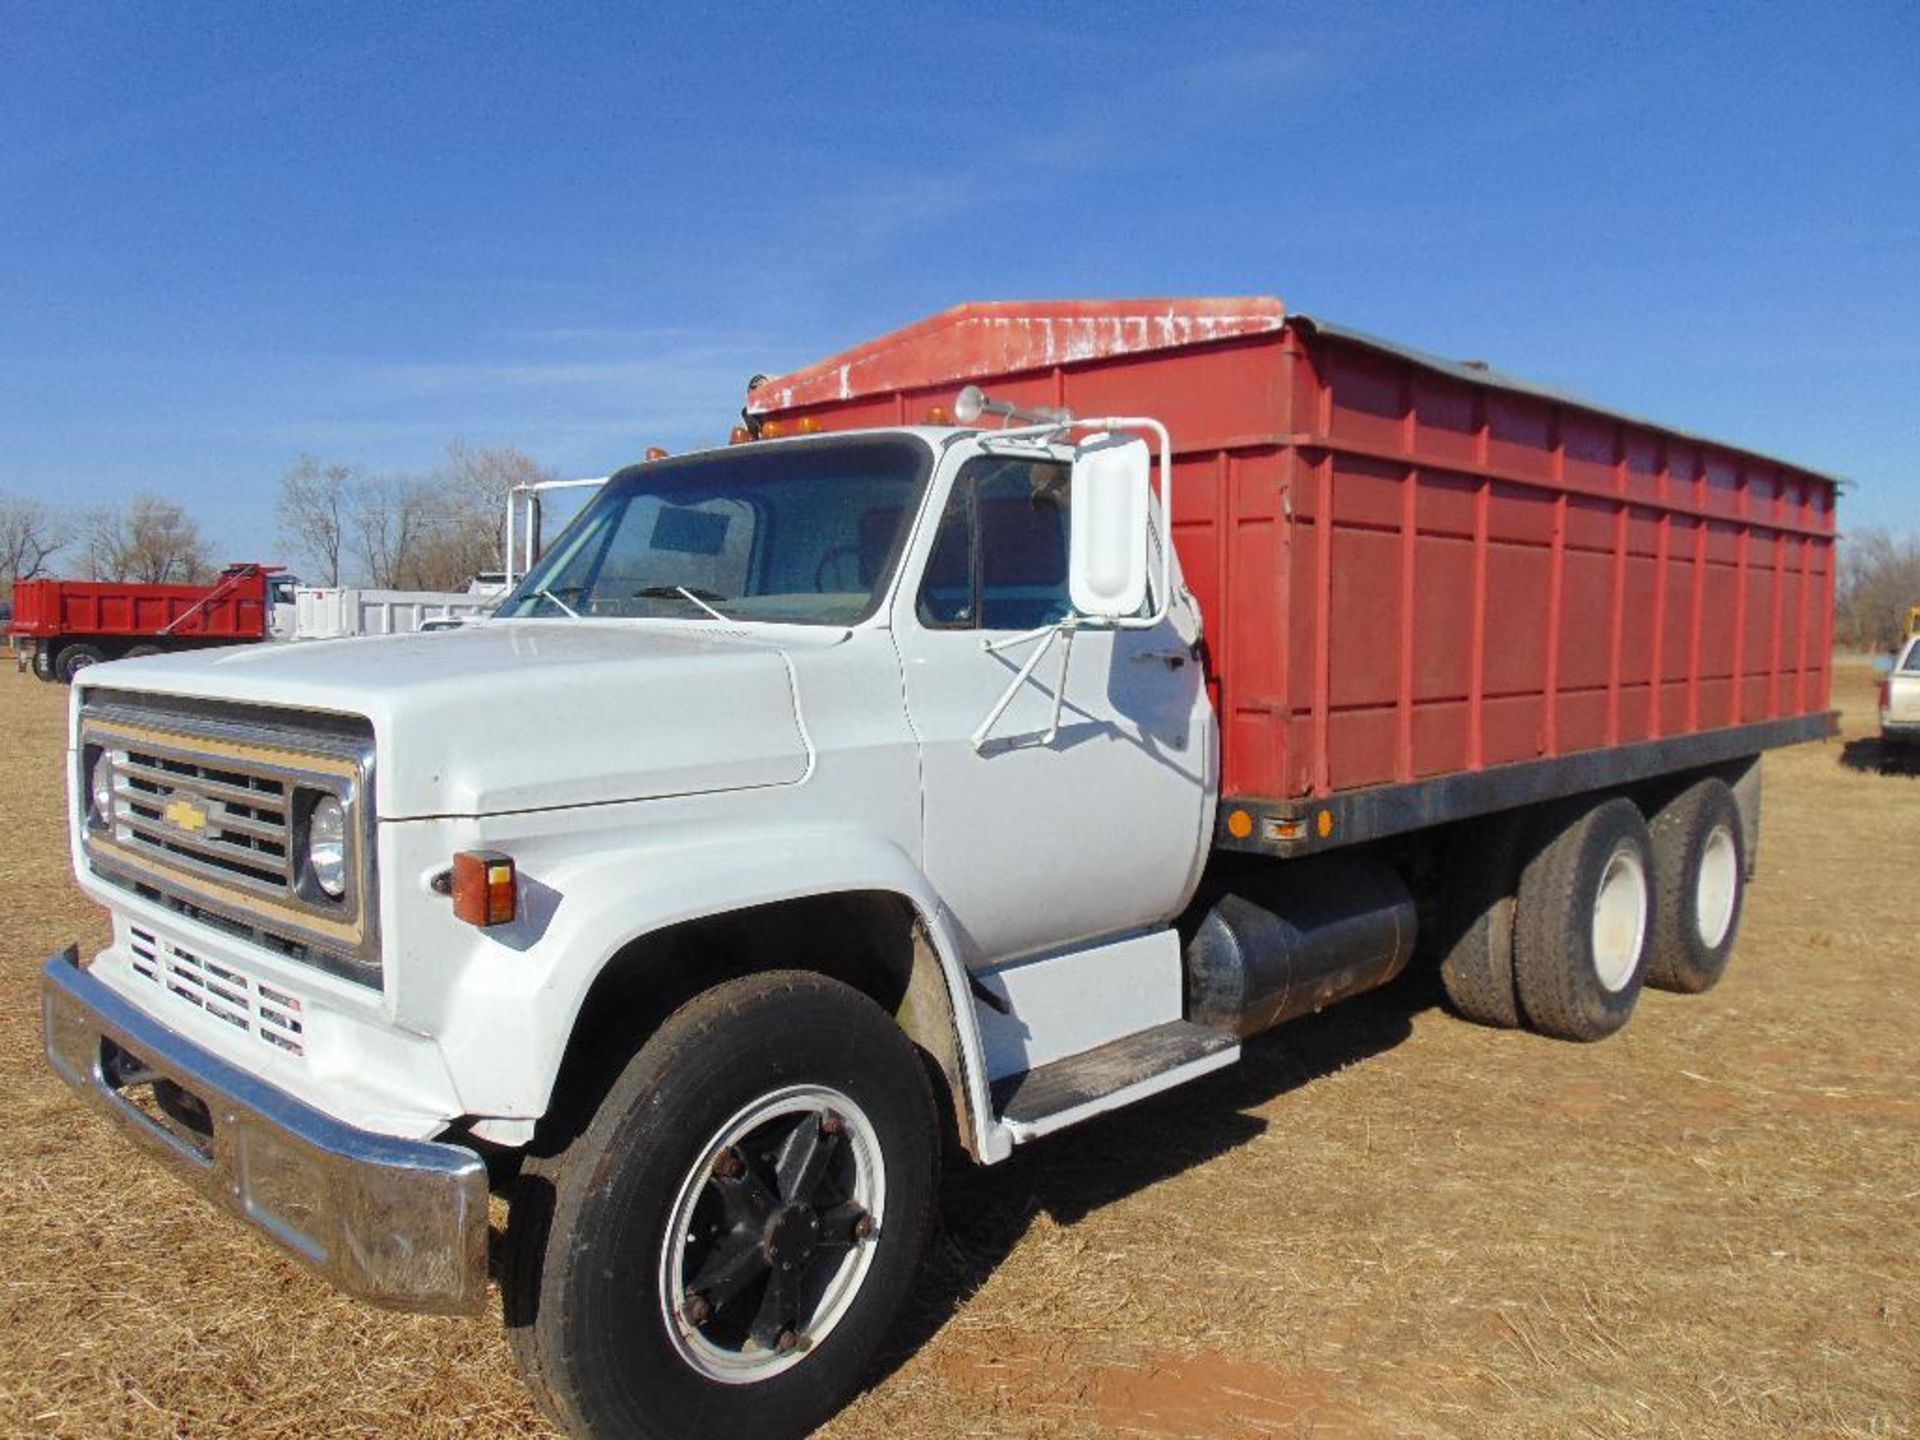 1973 Chevy 6500 T/A Grain Truck, s/n cce663v159454, 20' bed w/twin dump cylinders, grain boards, v8 - Image 4 of 8